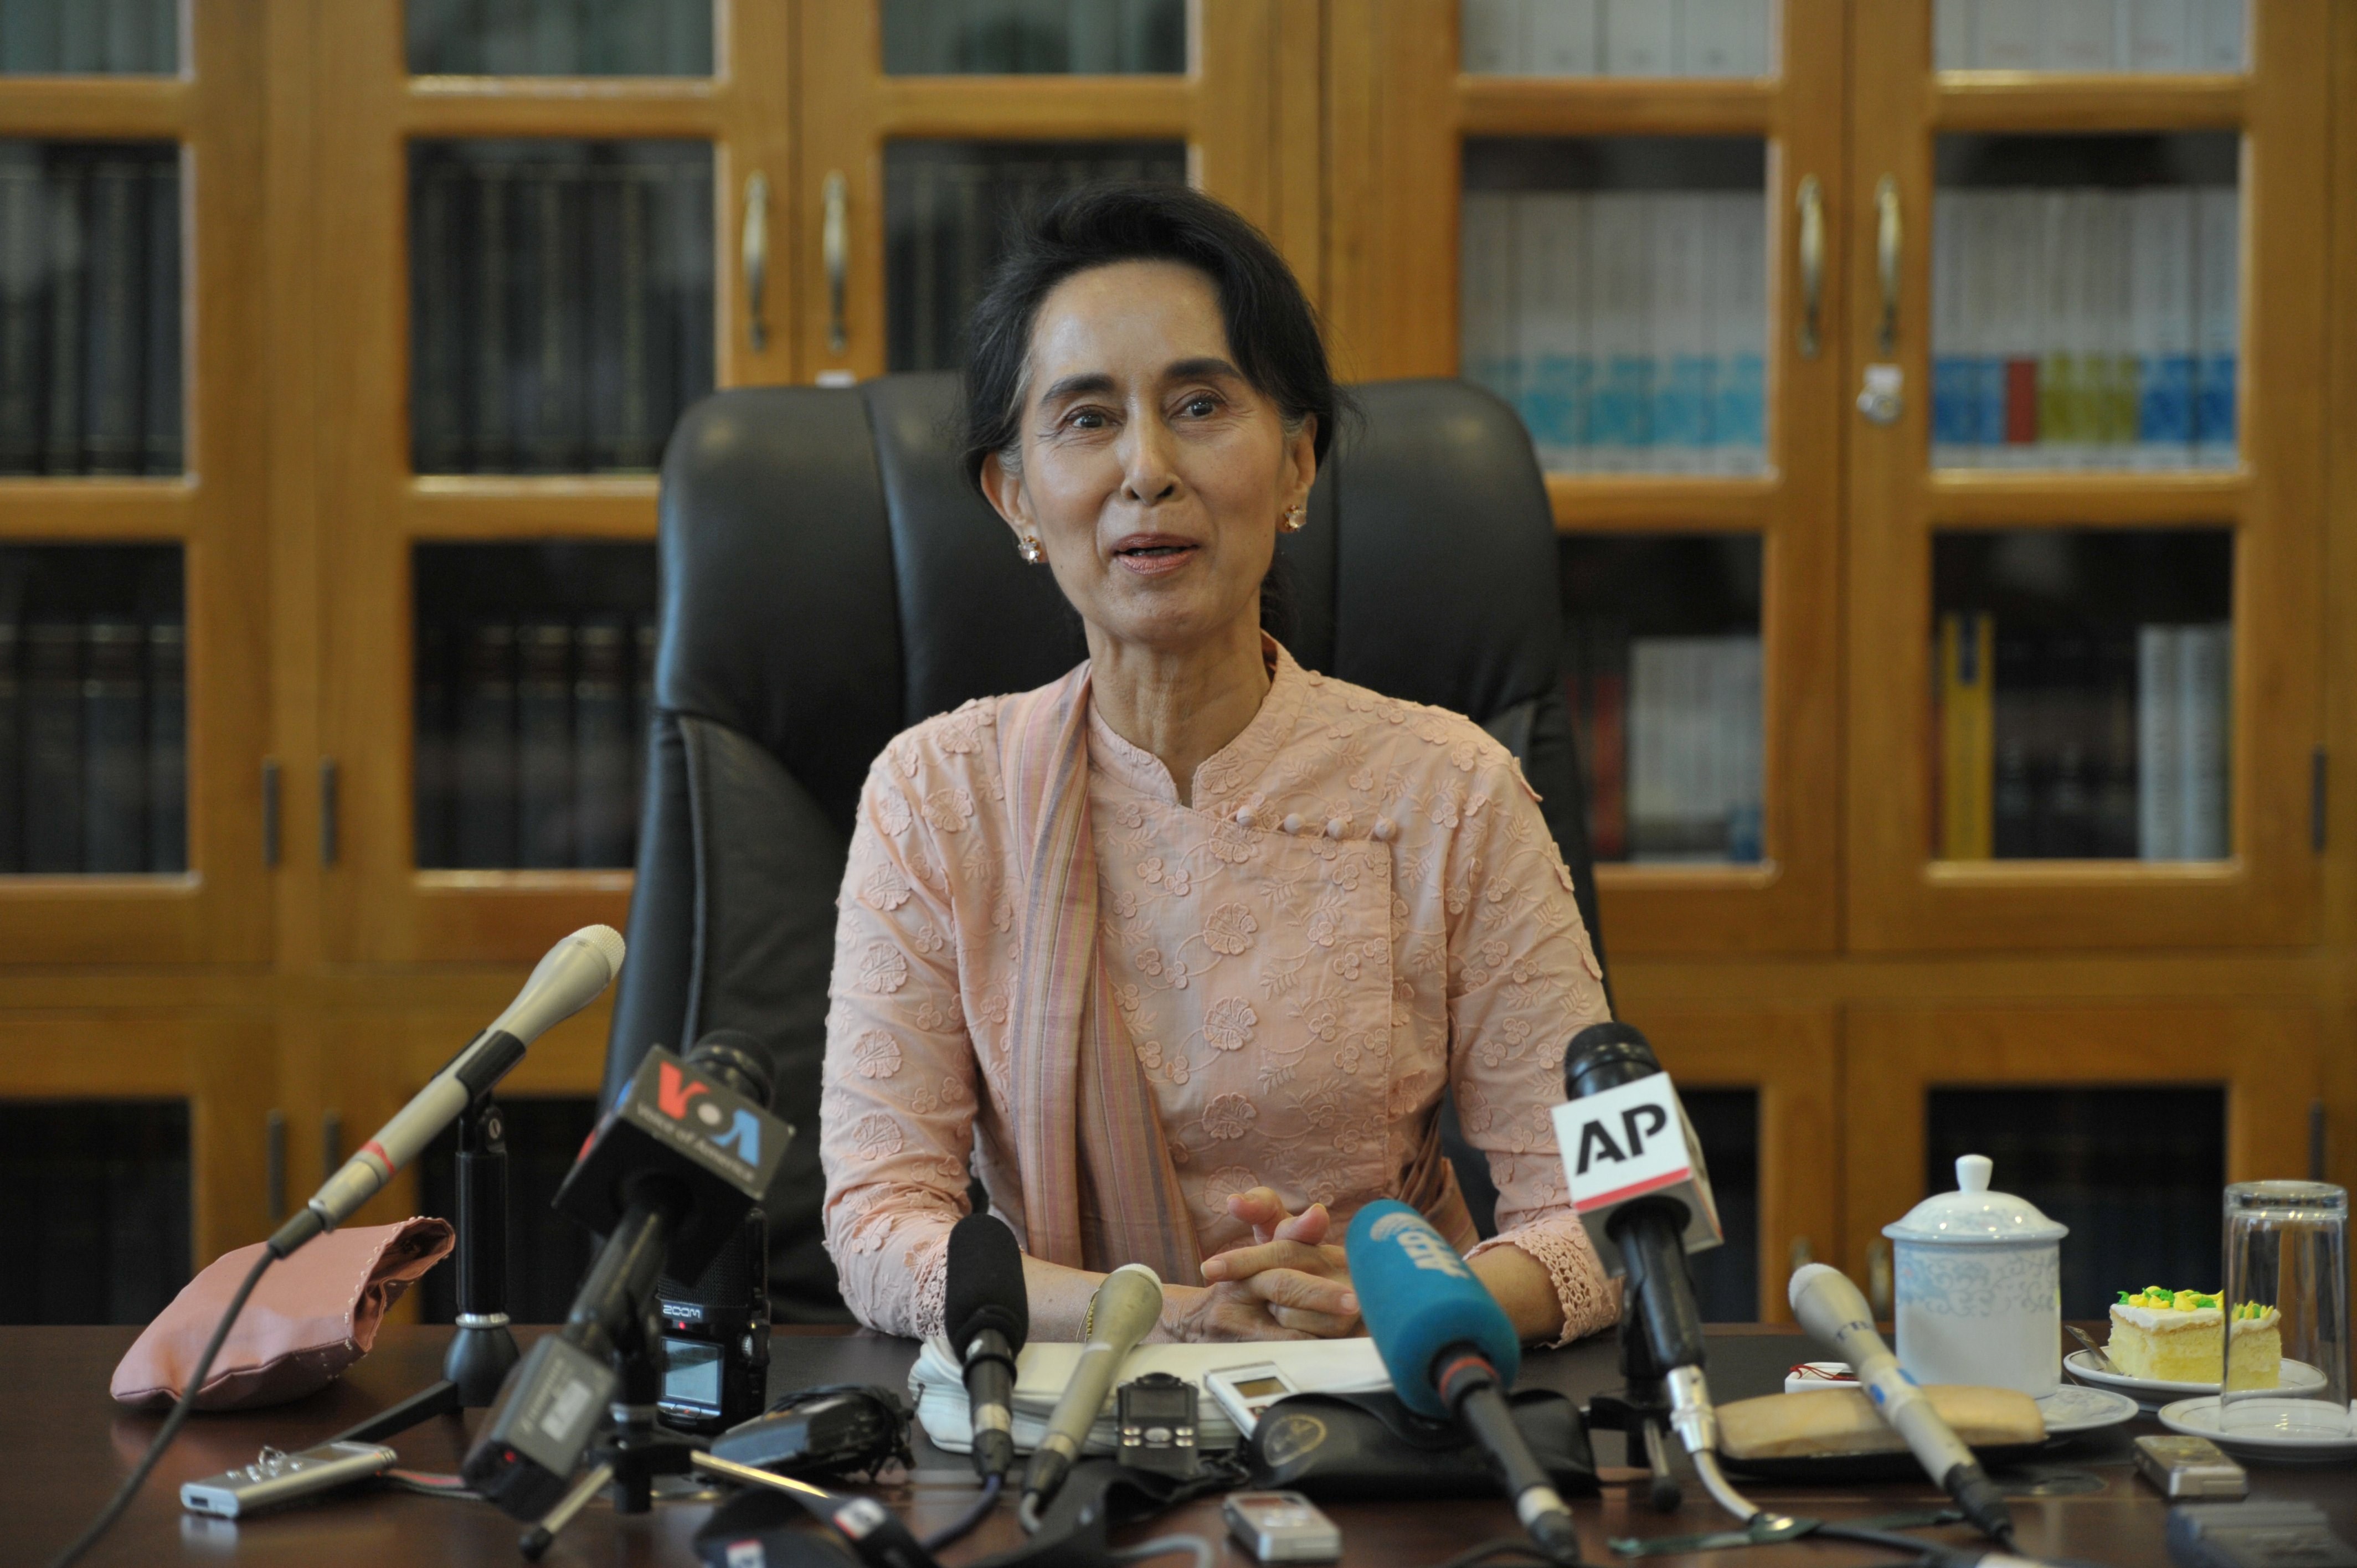 National League for Democracy chairperson Aung San Suu Kyi talks during a press conference at the parliament building in Naypyidaw, Burma, on April 9, 2015 (SOE THAN WIN—AFP/Getty Images)